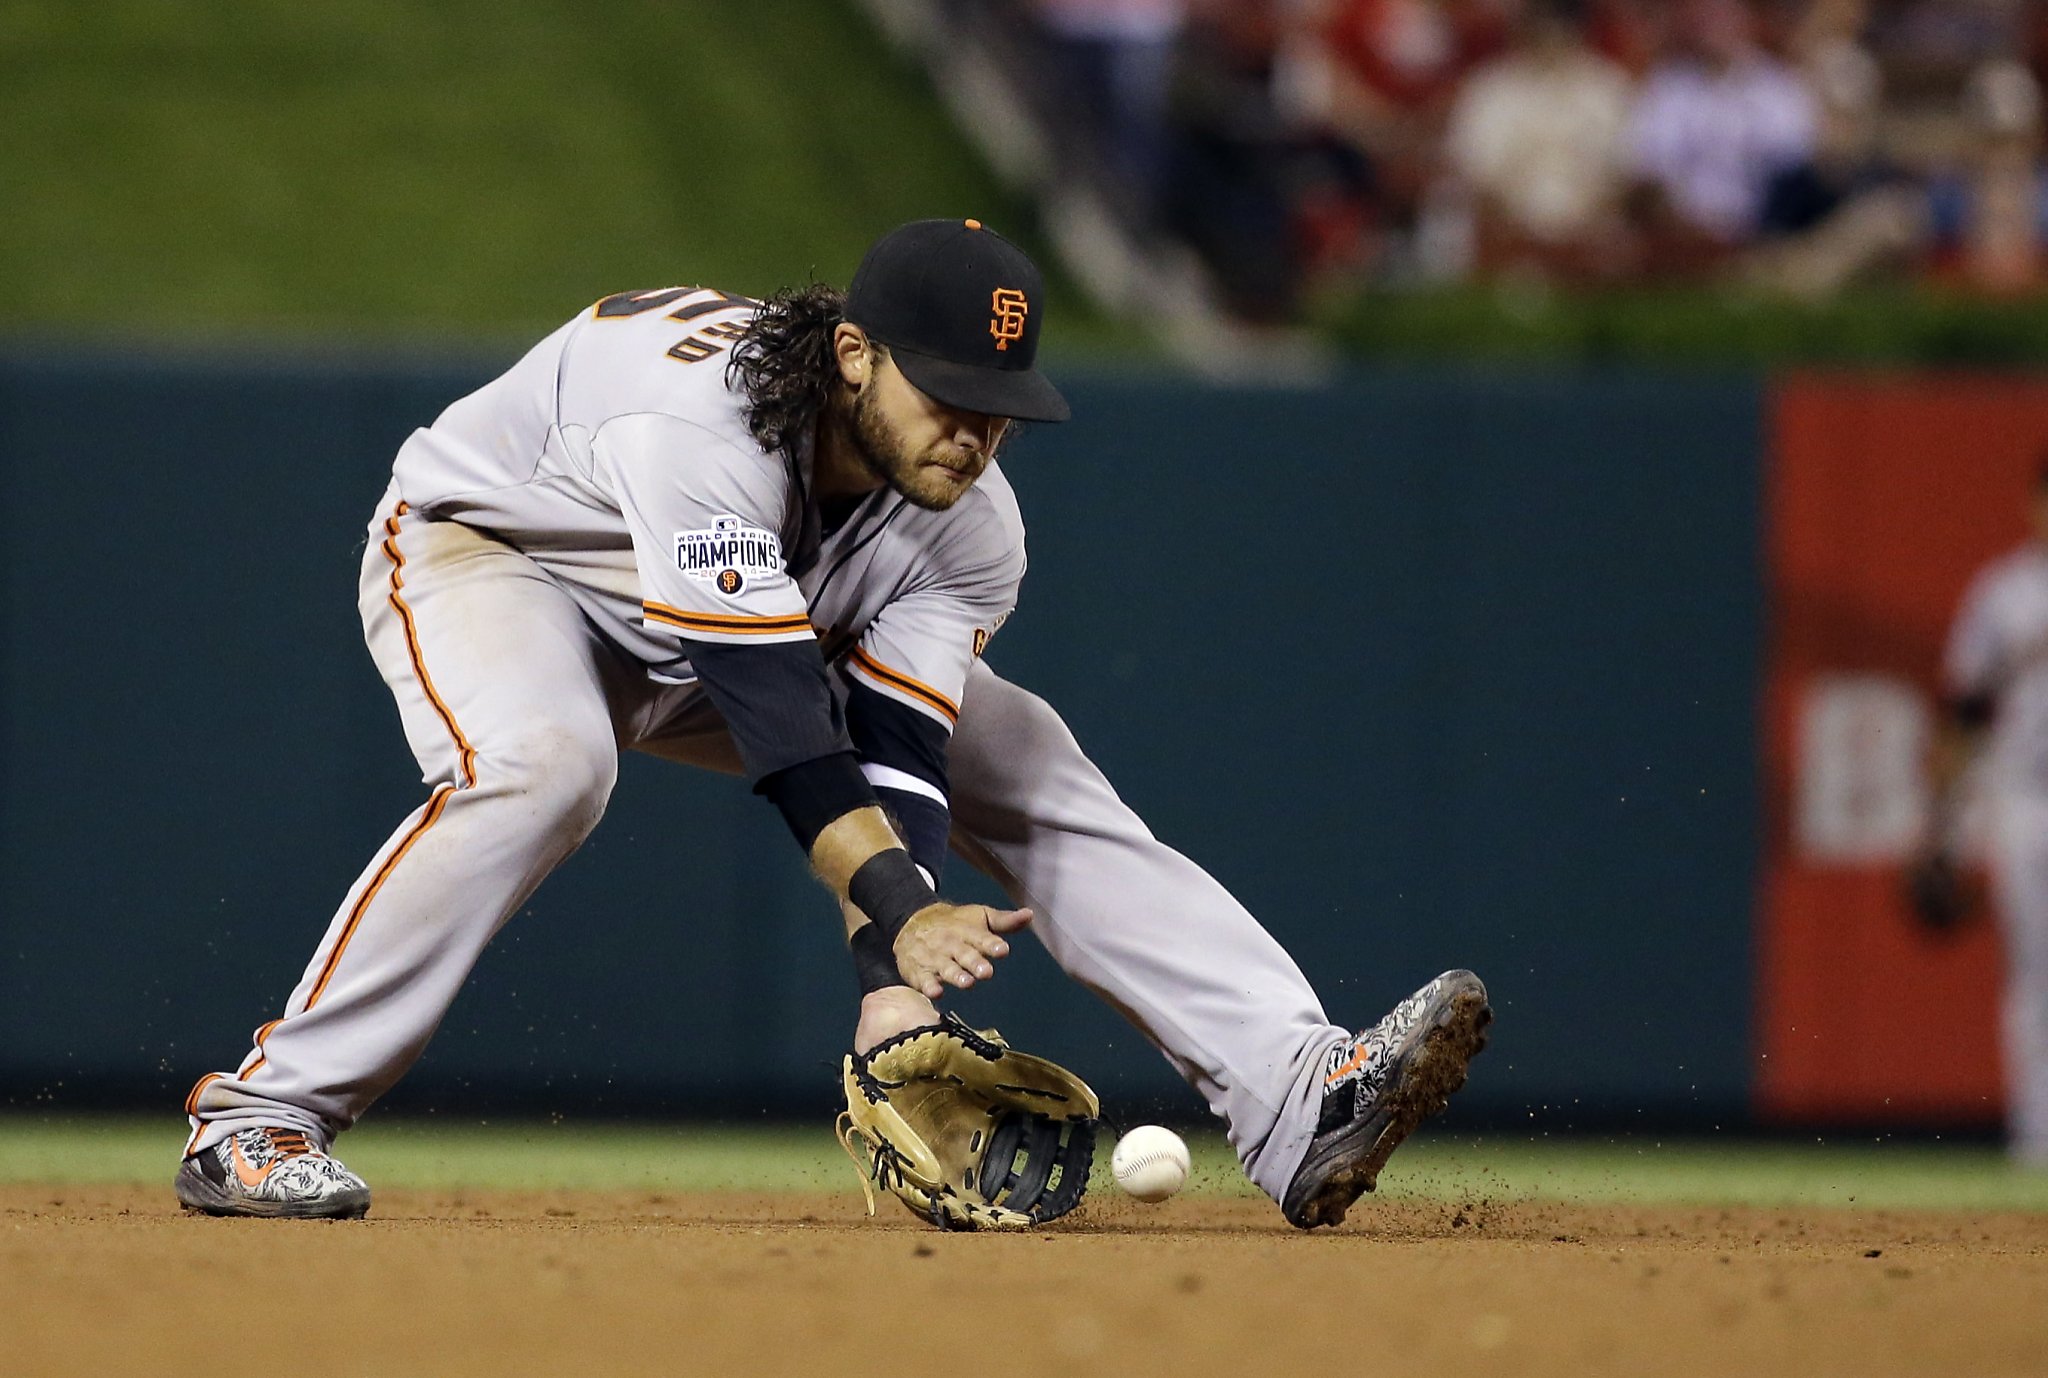 Brandon Crawford has Gold Glove streak snapped, Buster Posey